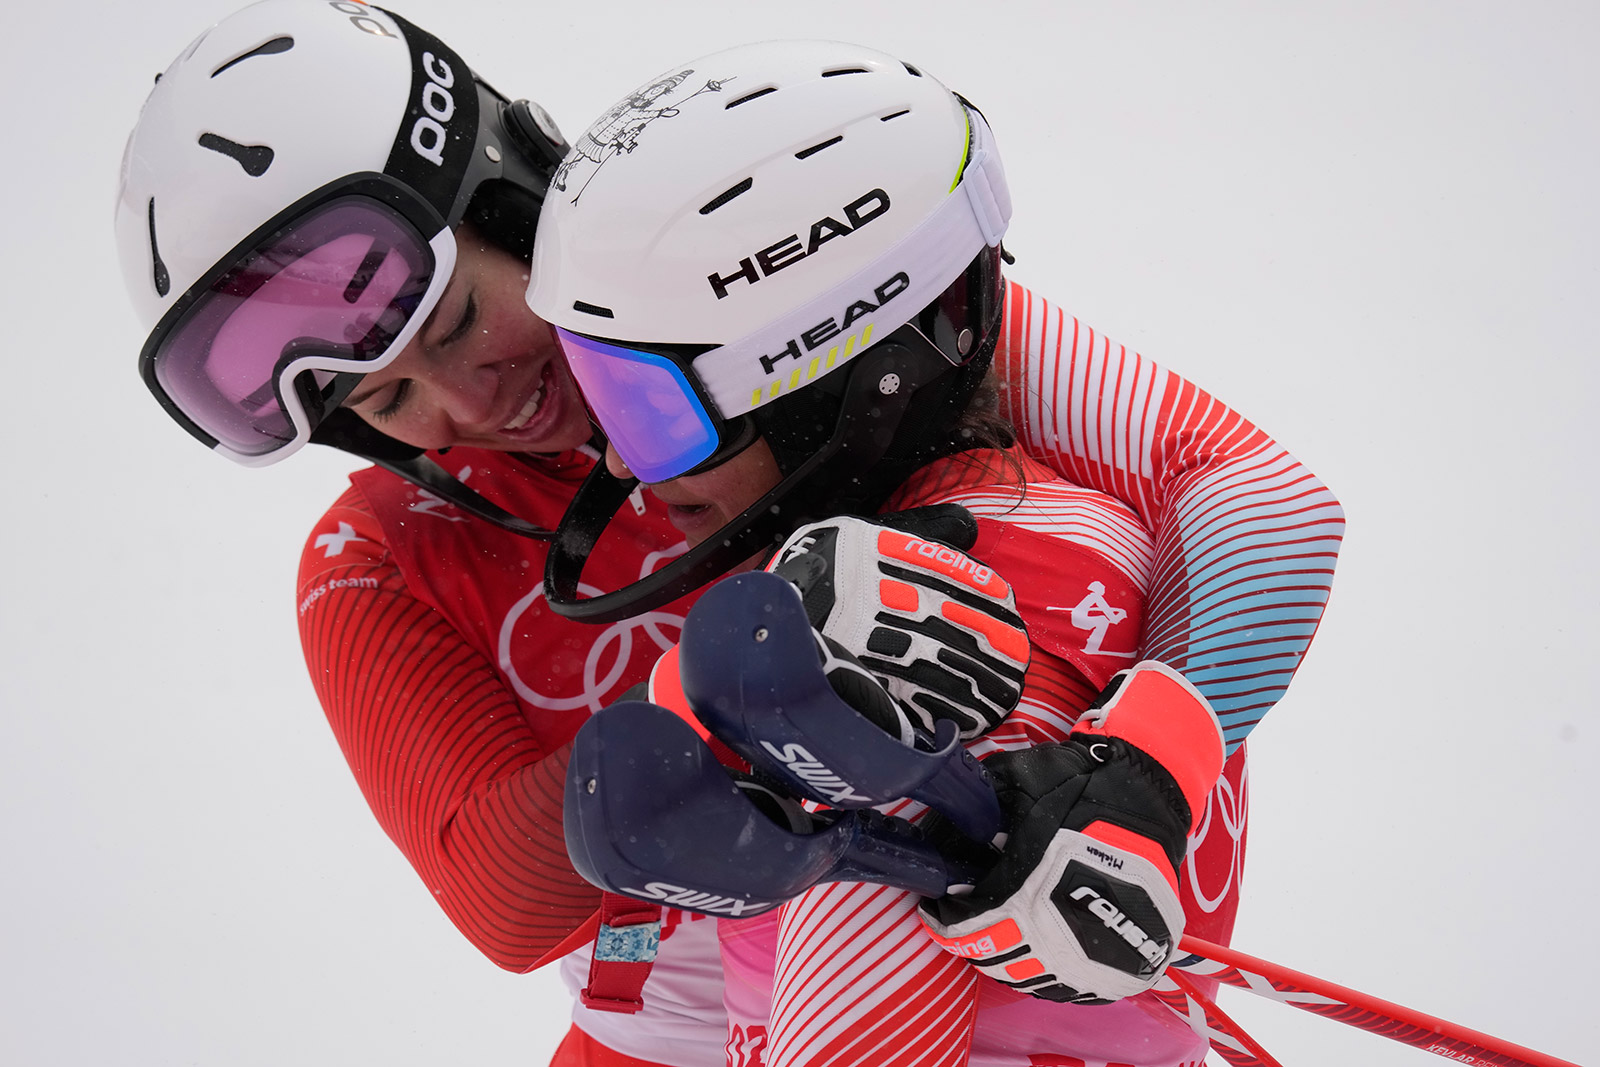 Switzerland's Michelle Gisin embraces teammate Wendy Holdener after finishing the women's combined slalom on Thursday.